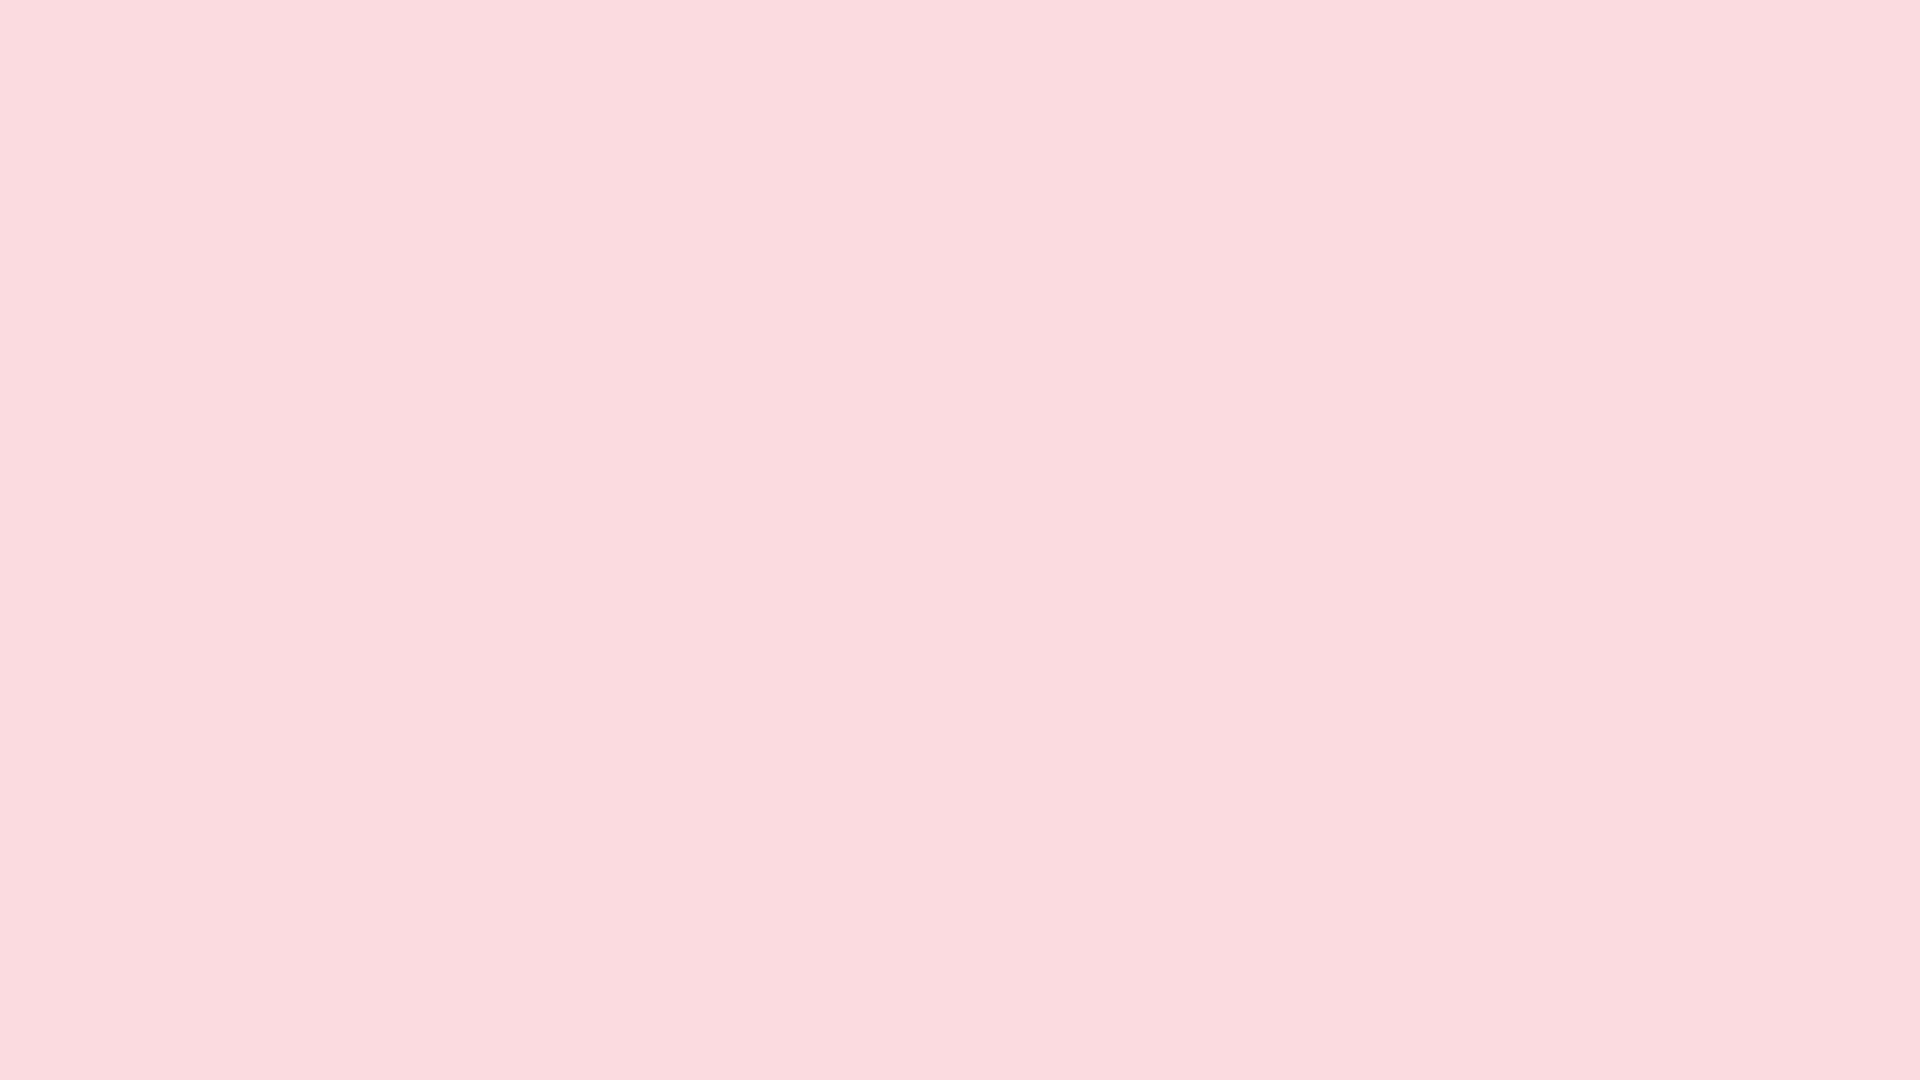 A Pastel Pink Aesthetic Computer Wallpaper